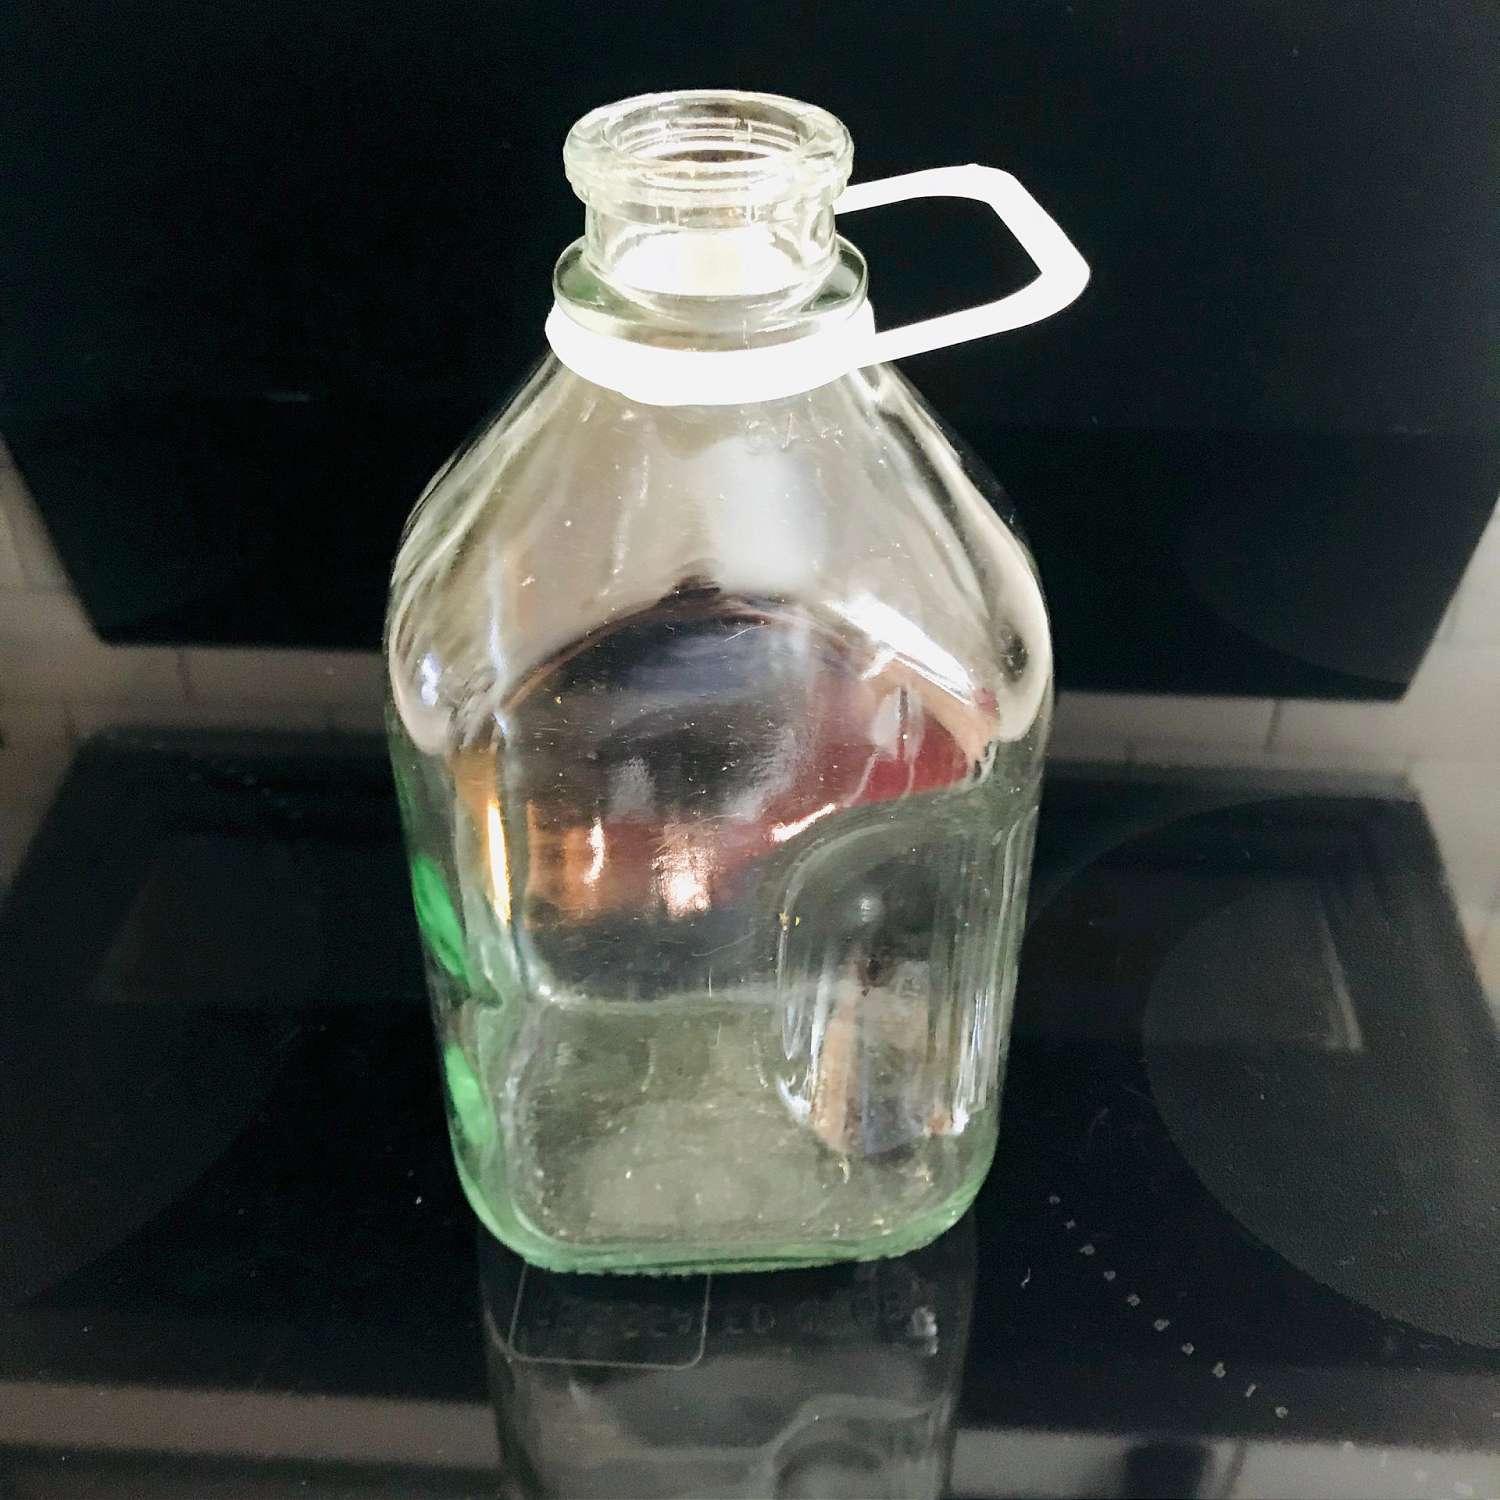 https://www.truevintageantiques.com/wp-content/uploads/2019/12/vintage-1-2-gallon-glass-milk-jug-delivery-bottle-with-handle-collectible-farmhouse-display-cabin-cottage-lodge-cold-milk-refrigerator-jar-5df1abe61-scaled.jpg